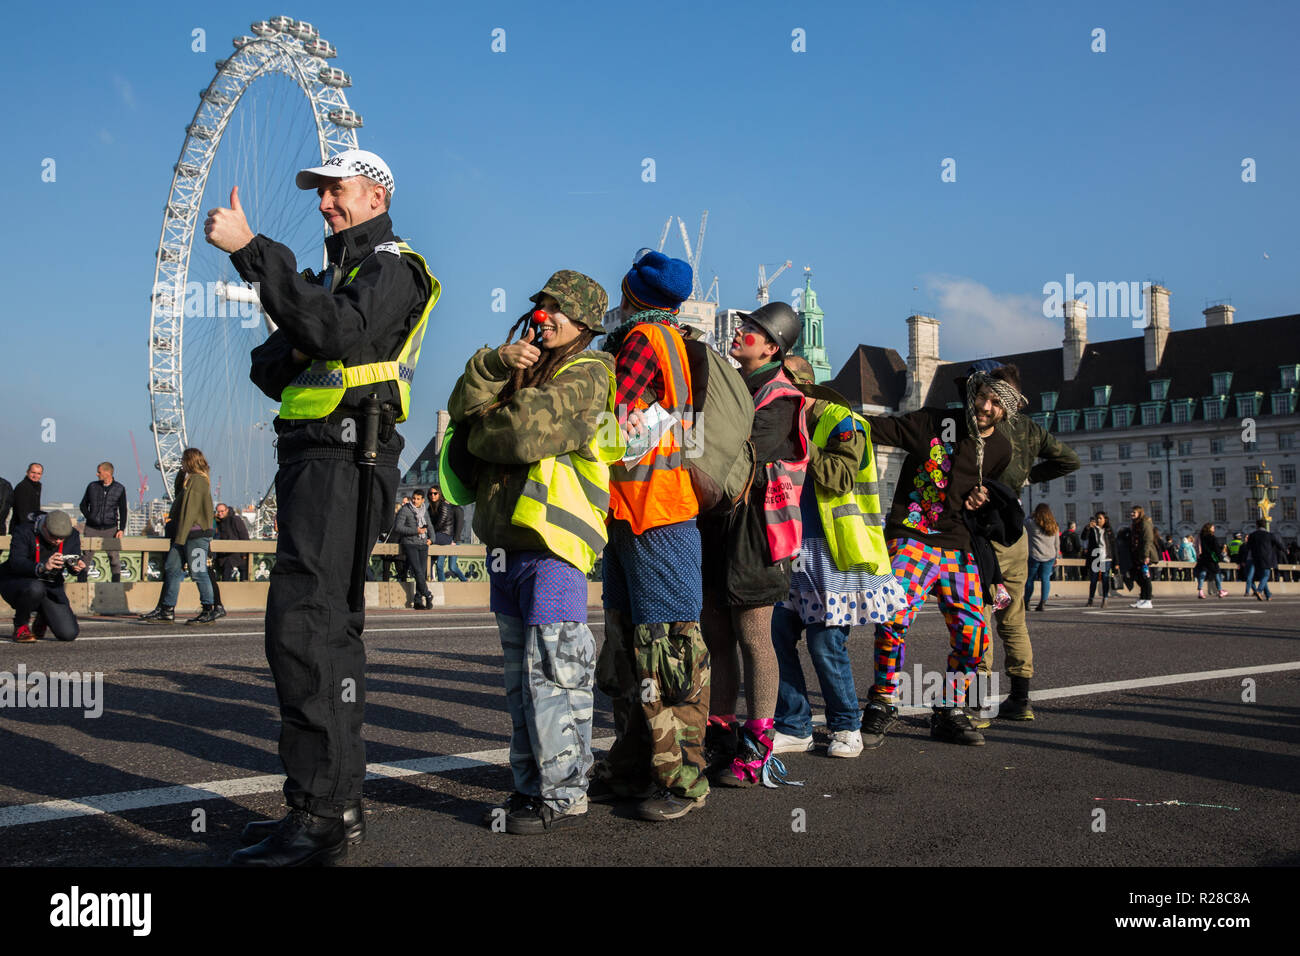 London, UK. 17th November, 2018. Clowns from Clandestine Insurgent Rebel Clown Army (CIRCA) support Extinction Rebellion blocking Westminster Bridge, one of five bridges blocked in central London, as part of a Rebellion Day event to highlight 'criminal inaction in the face of climate change catastrophe and ecological collapse' by the UK Government as part of a programme of civil disobedience during which scores of campaigners have been arrested. Credit: Mark Kerrison/Alamy Live News Stock Photo